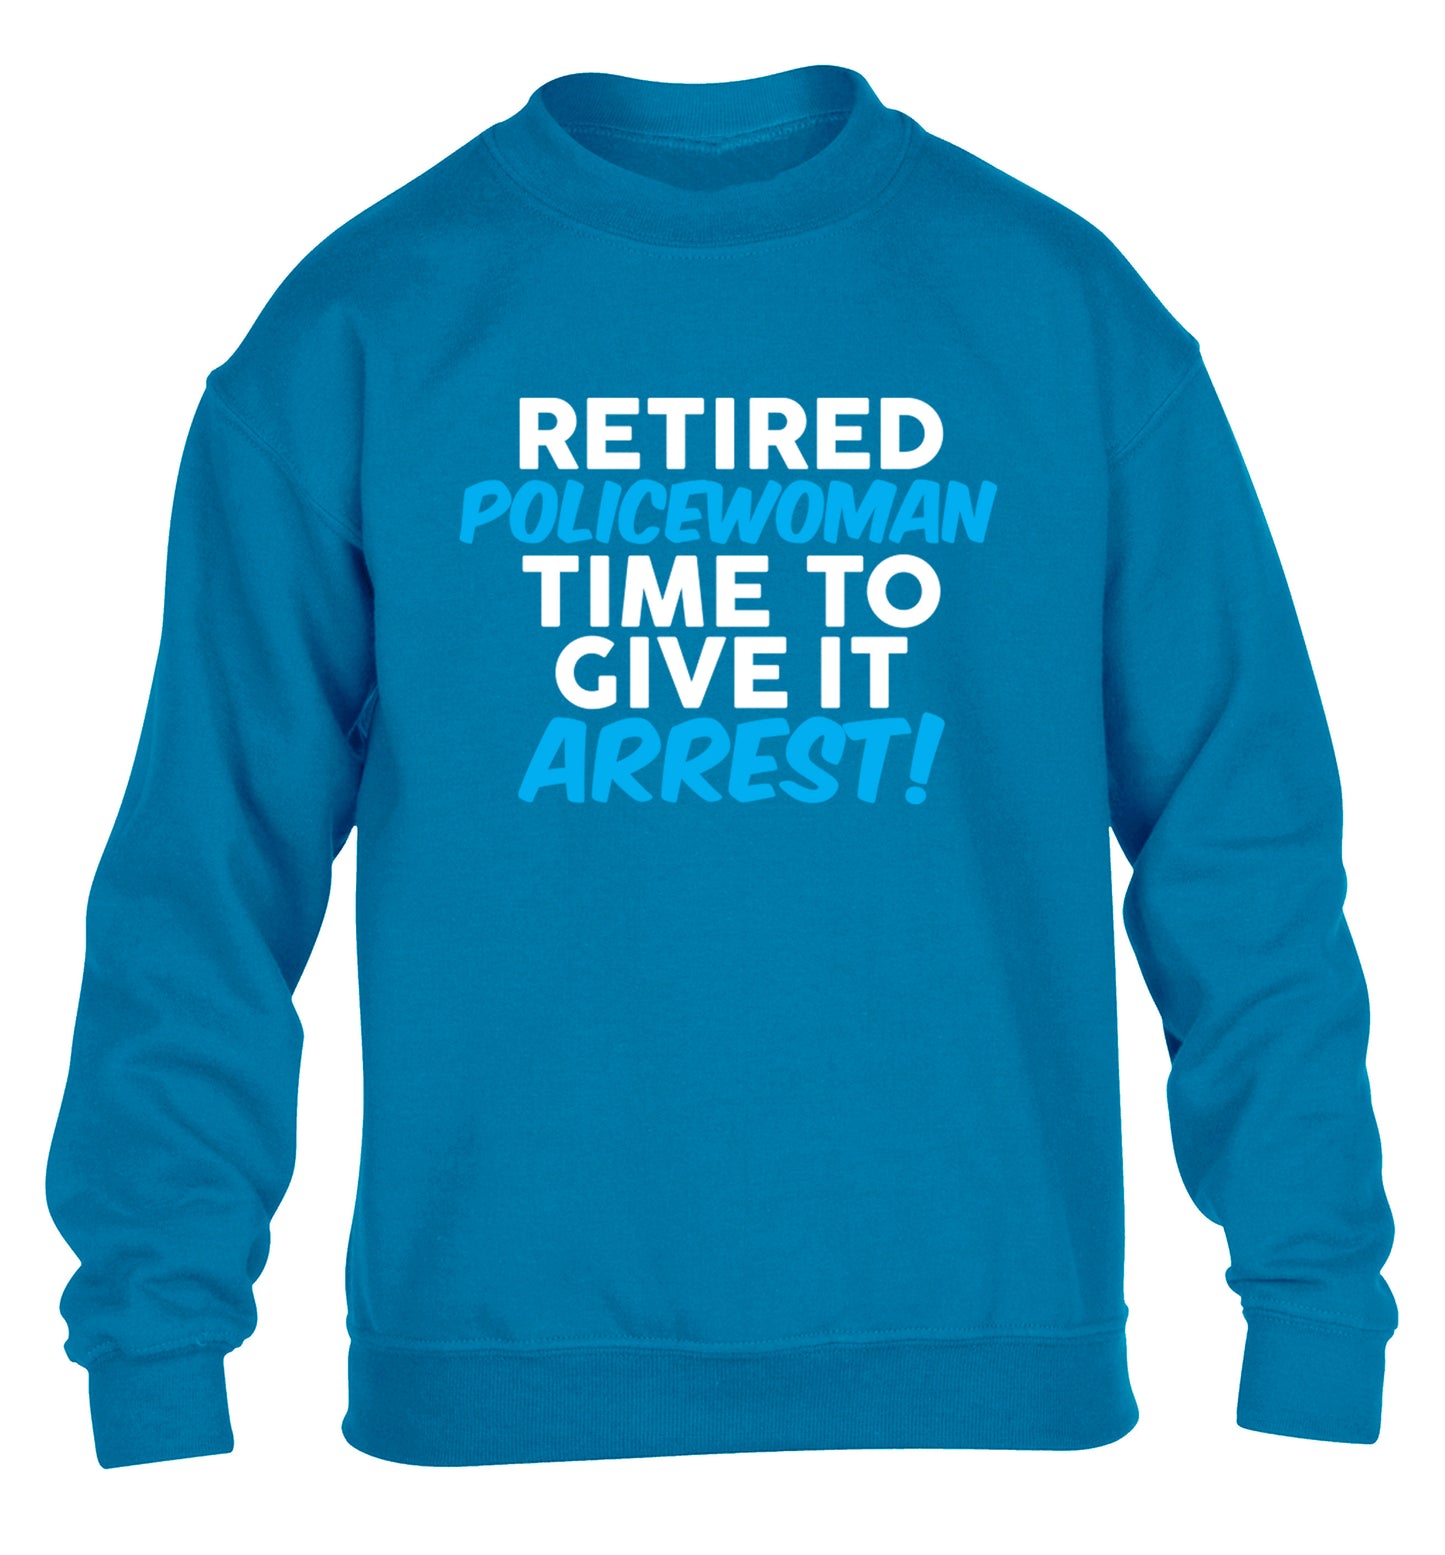 Retired policewoman time to give it arrest children's blue sweater 12-13 Years